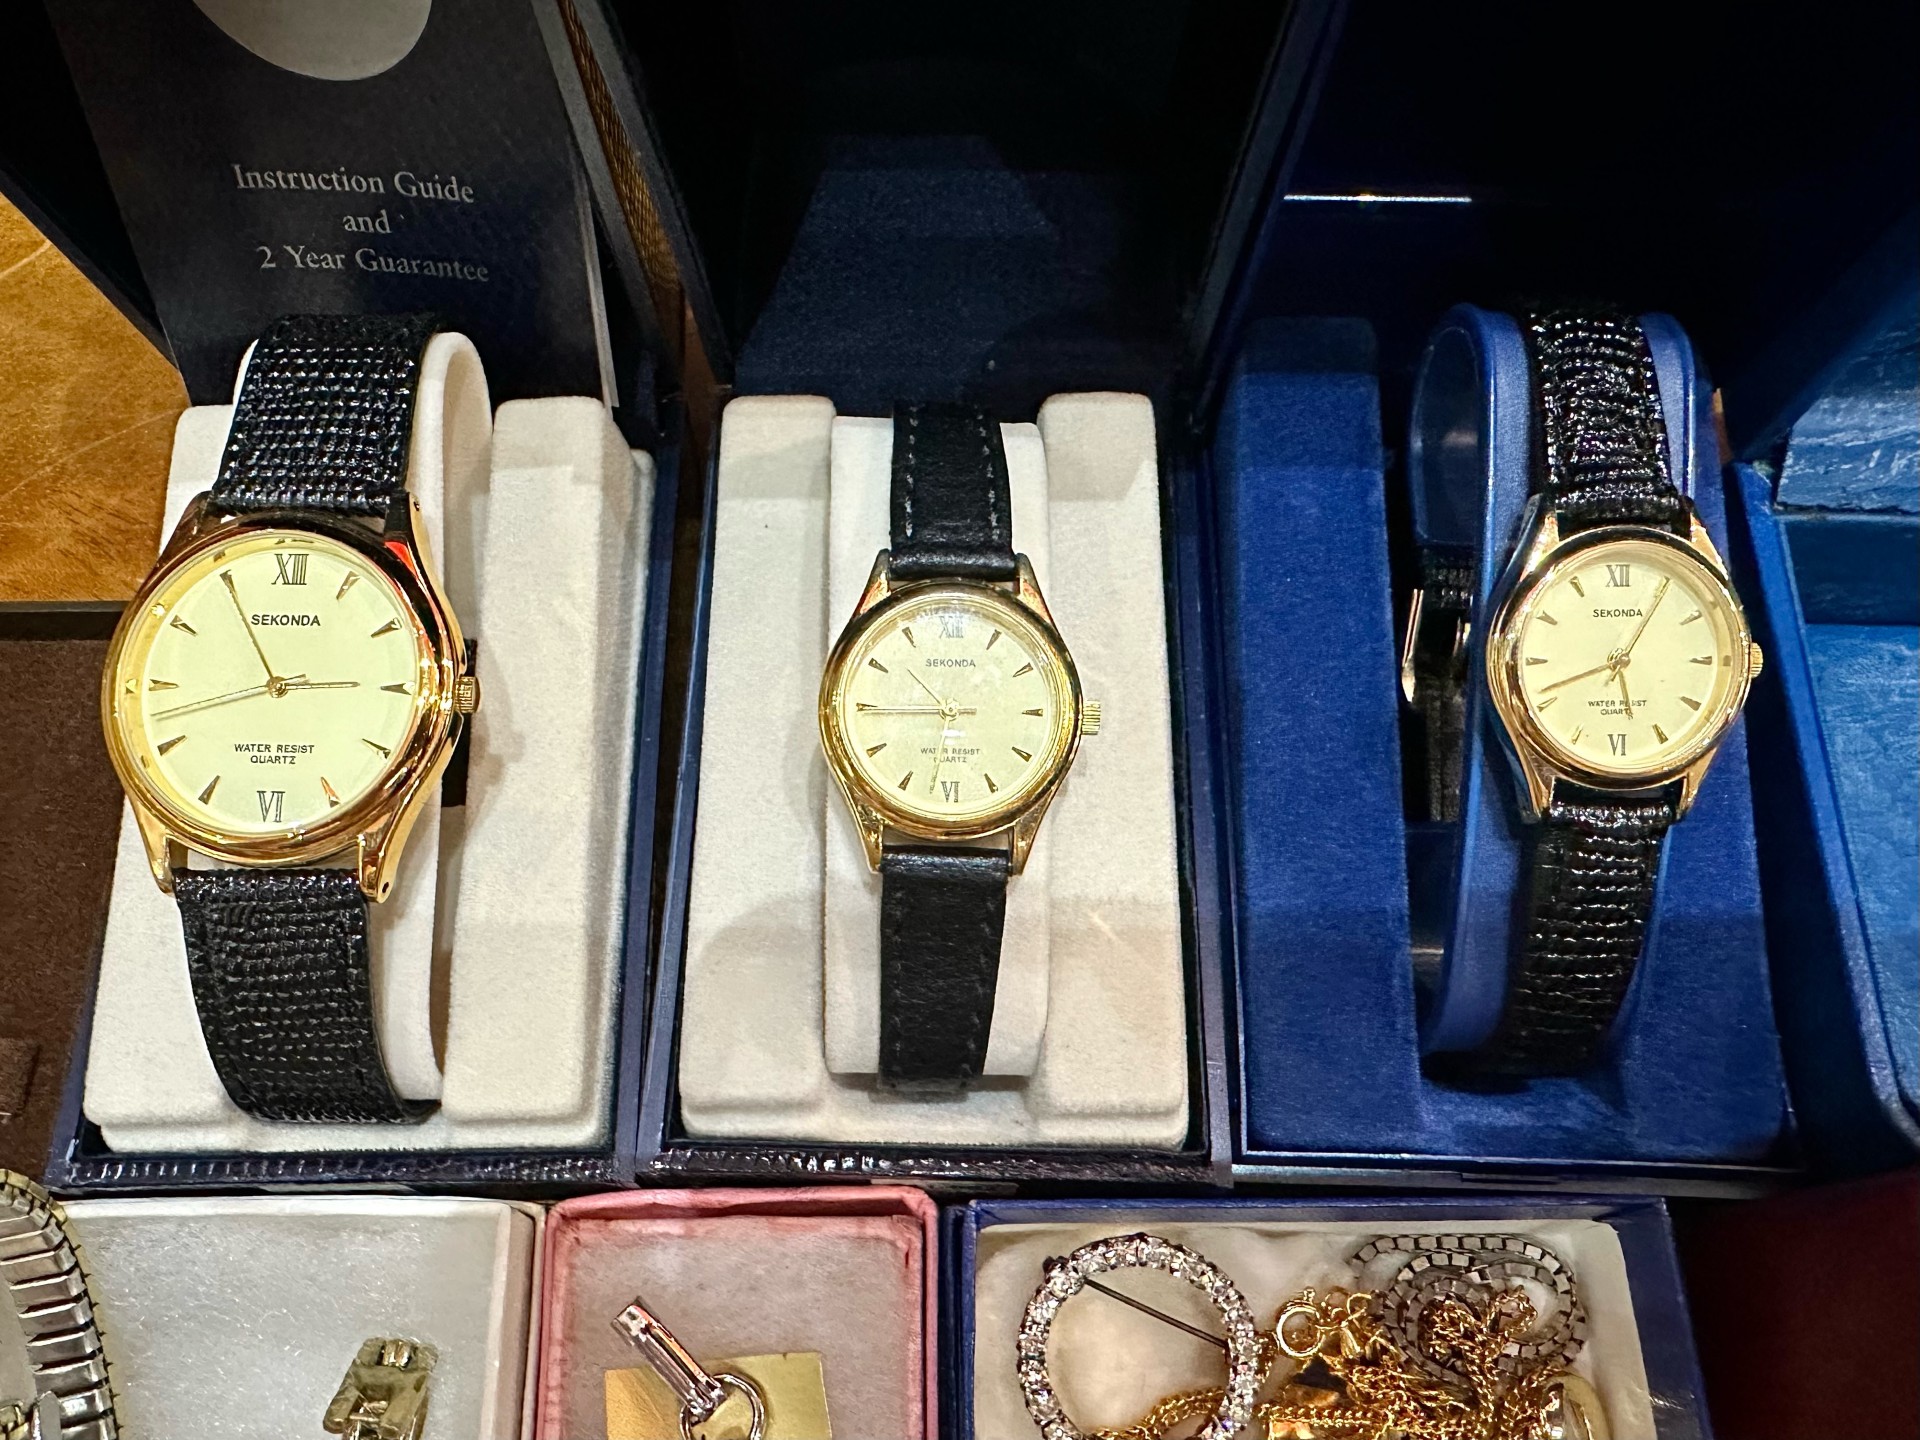 Collection of Quality Costume Jewellery & Watches, Vivaldi ladies watch, four cocktail watches, - Image 2 of 6